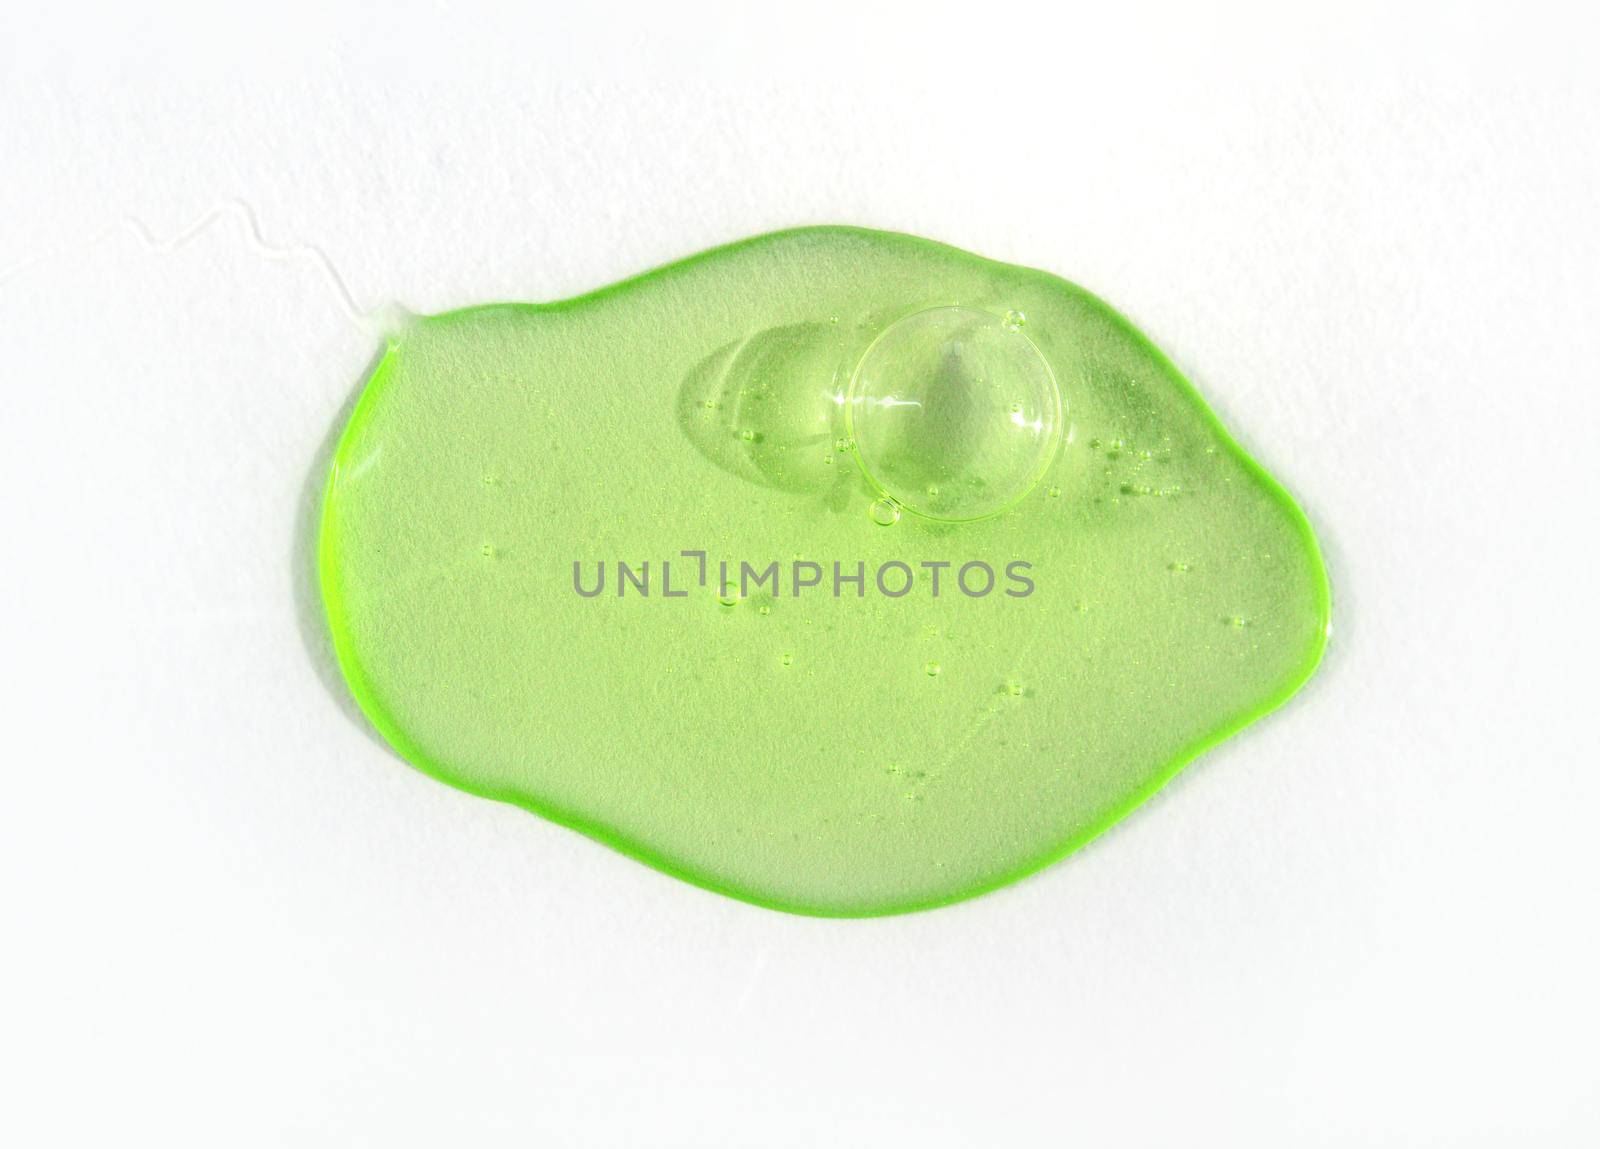 A drop of green hyaluronic acid on white background. Cosmetics and healthcare concept closeup. Dose of serum or retinol with air bubbles. Top view. Luxury gel or beauty product presentation, macro